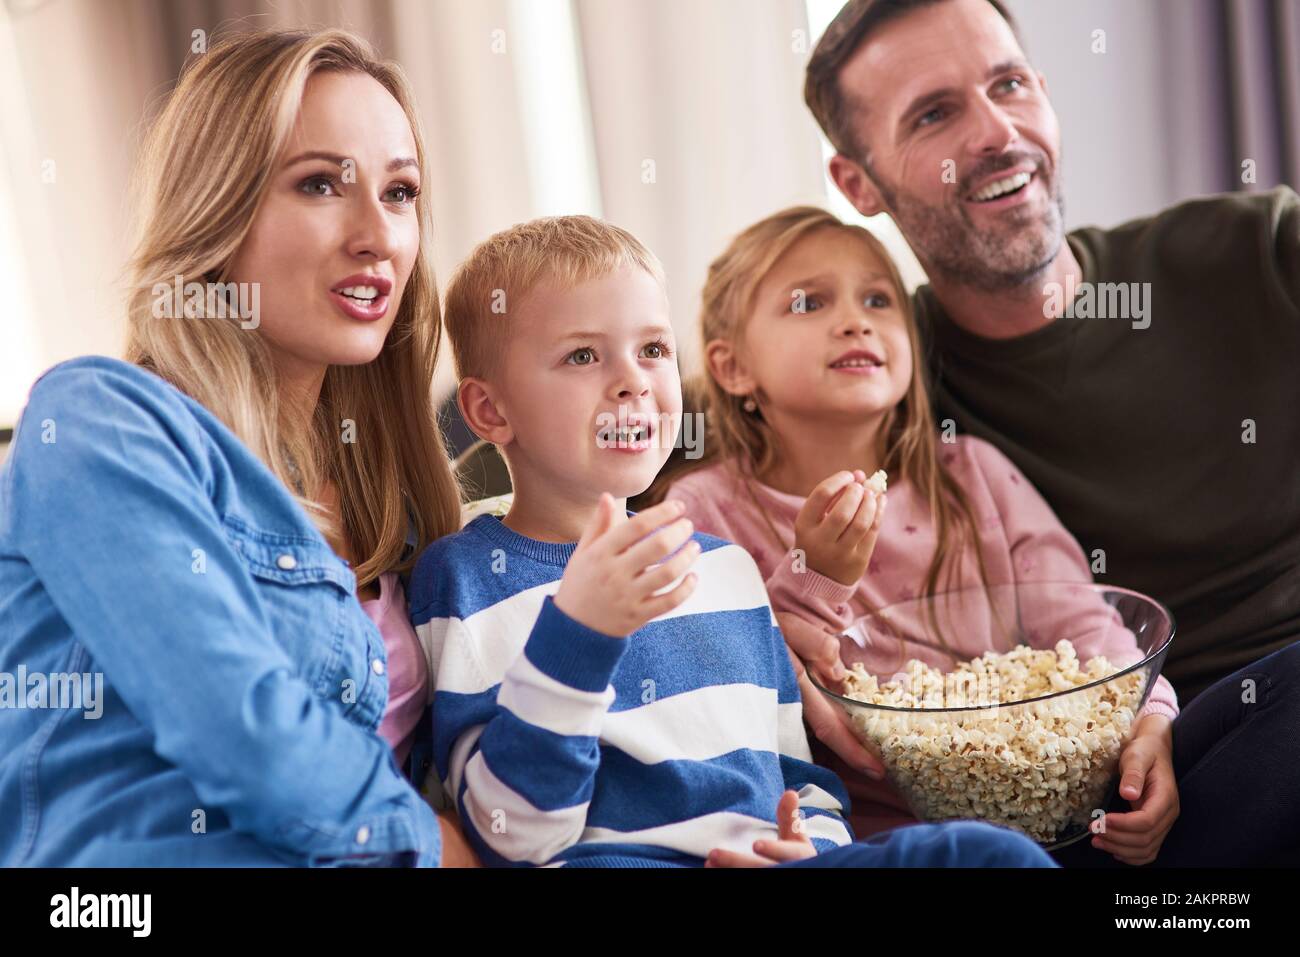 Family with two children spending time together in living room Stock Photo